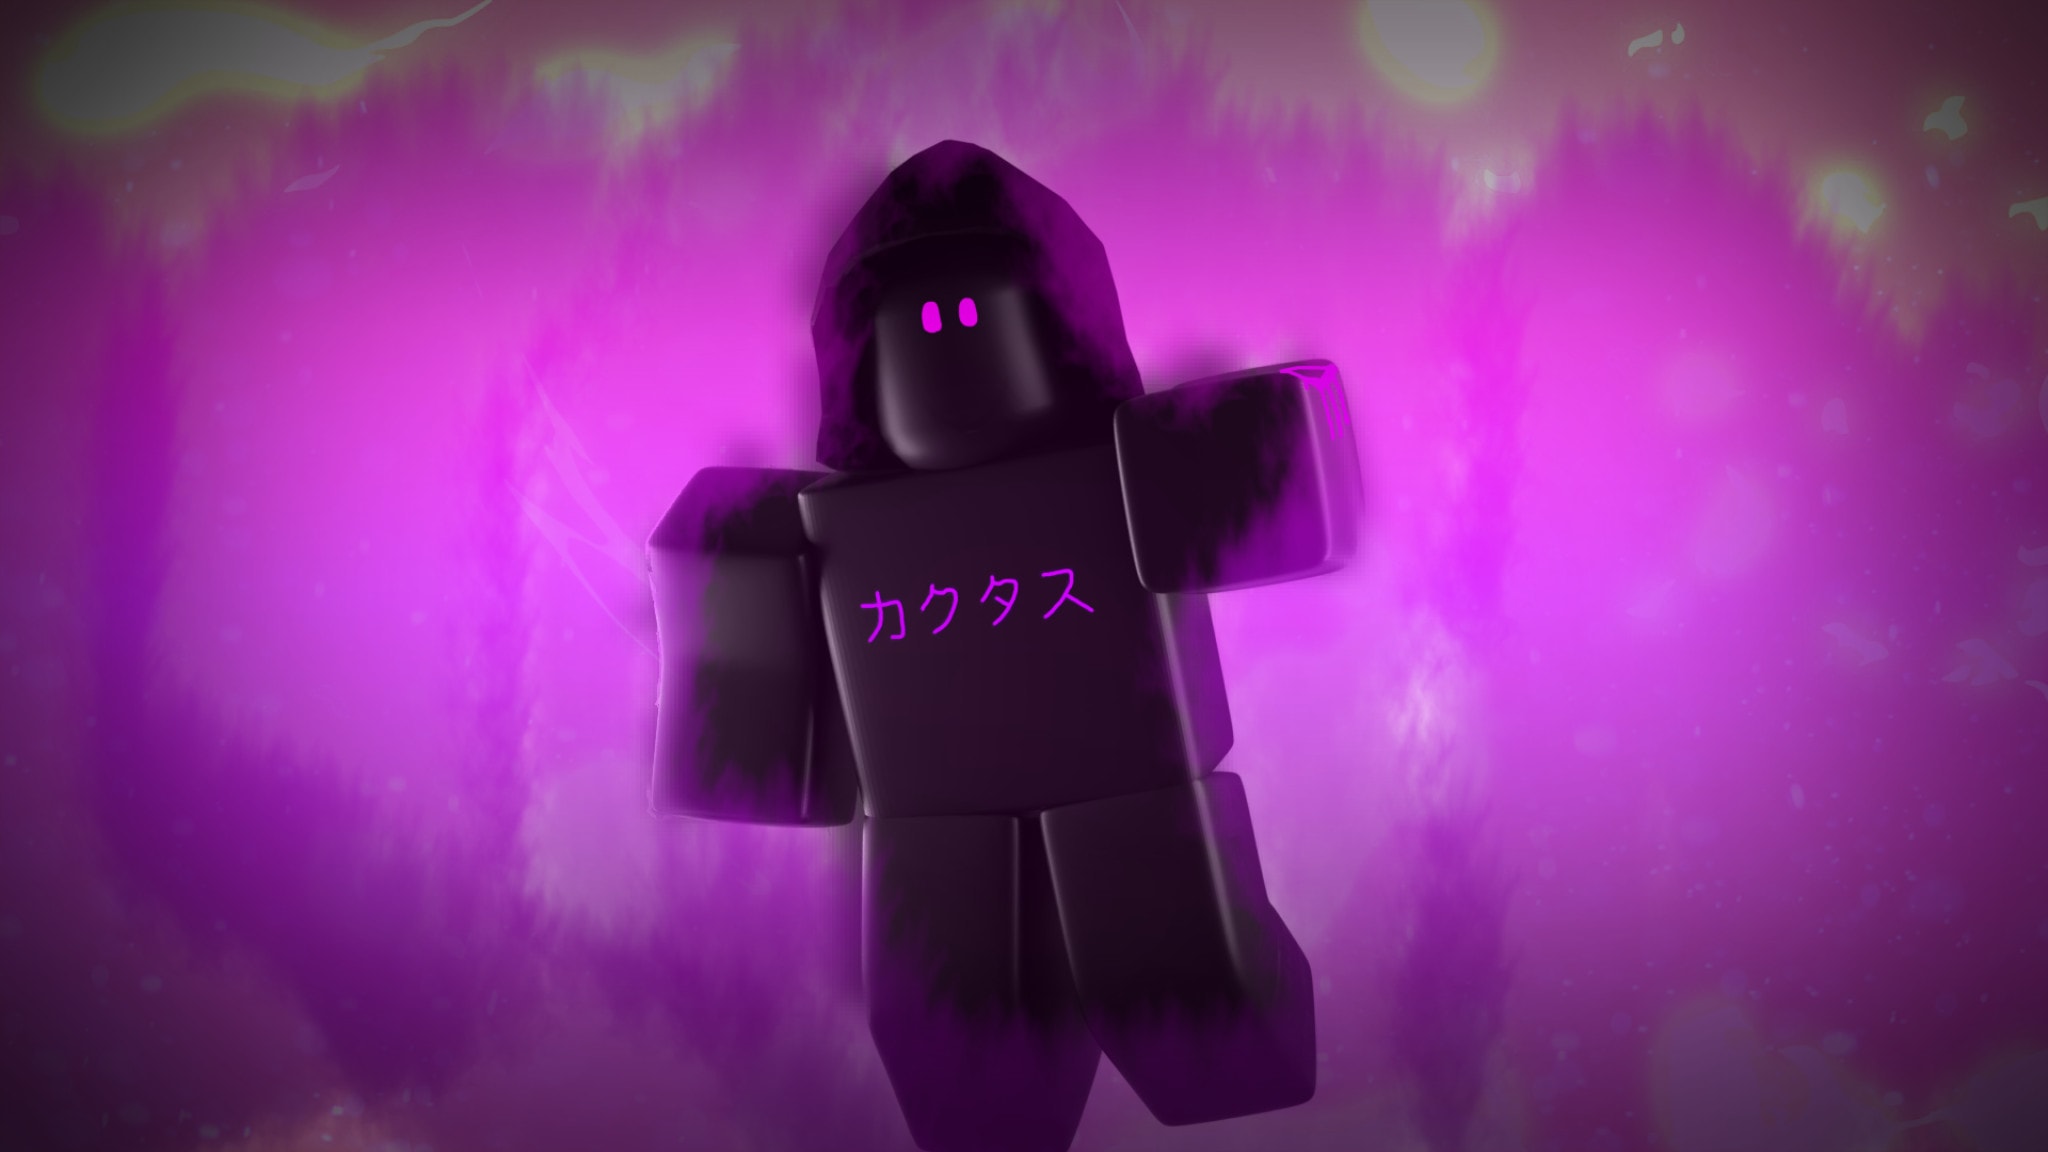 Void on X: Roblox Wallpaper HD: Feel free to use  it. All support appreciated! #RobloxGFX #Roblox  / X